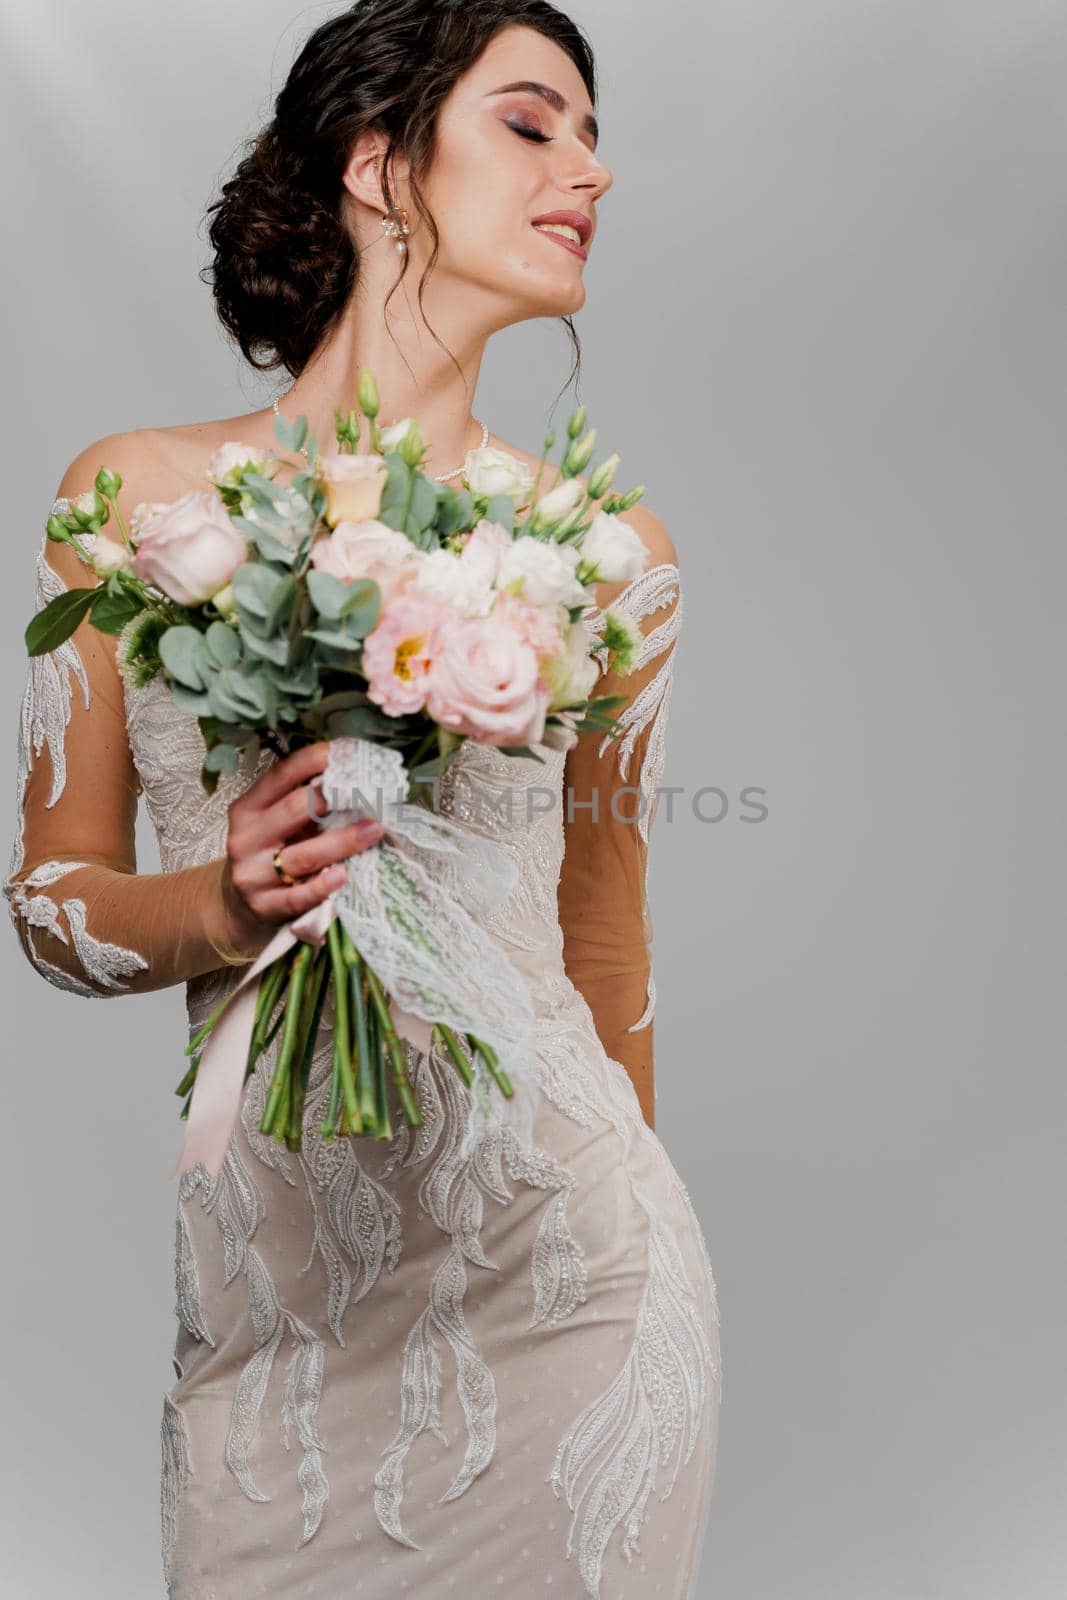 Bride with wedding bouquet looks right side. Attractive girl vertical portrait for social networks. Girl in wedding gown on blank background